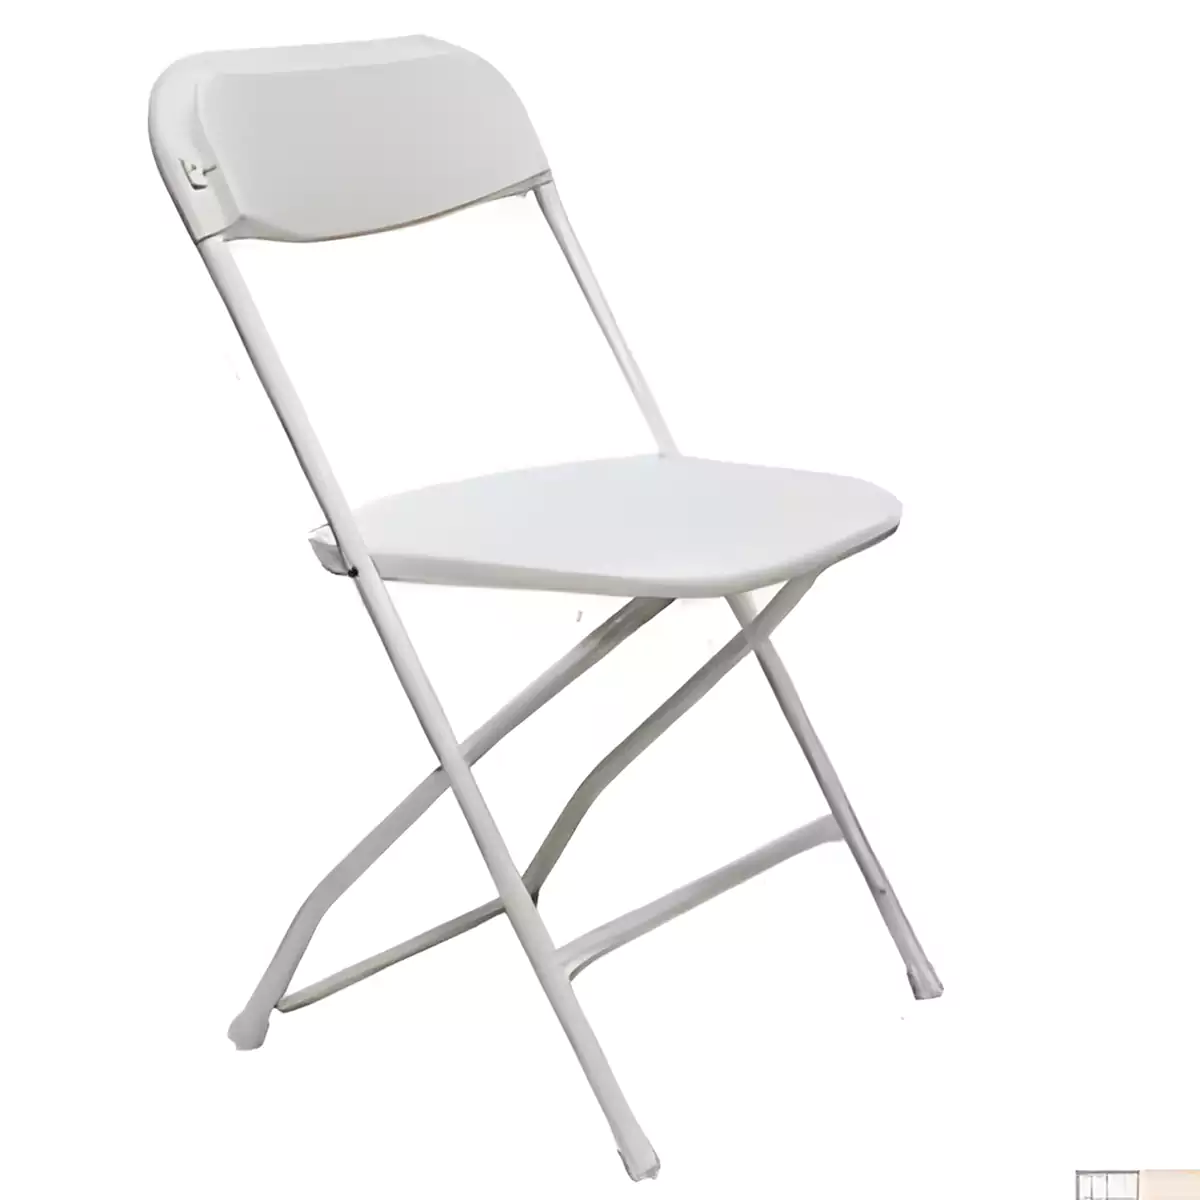 Chairs (Set of 10) Support Items